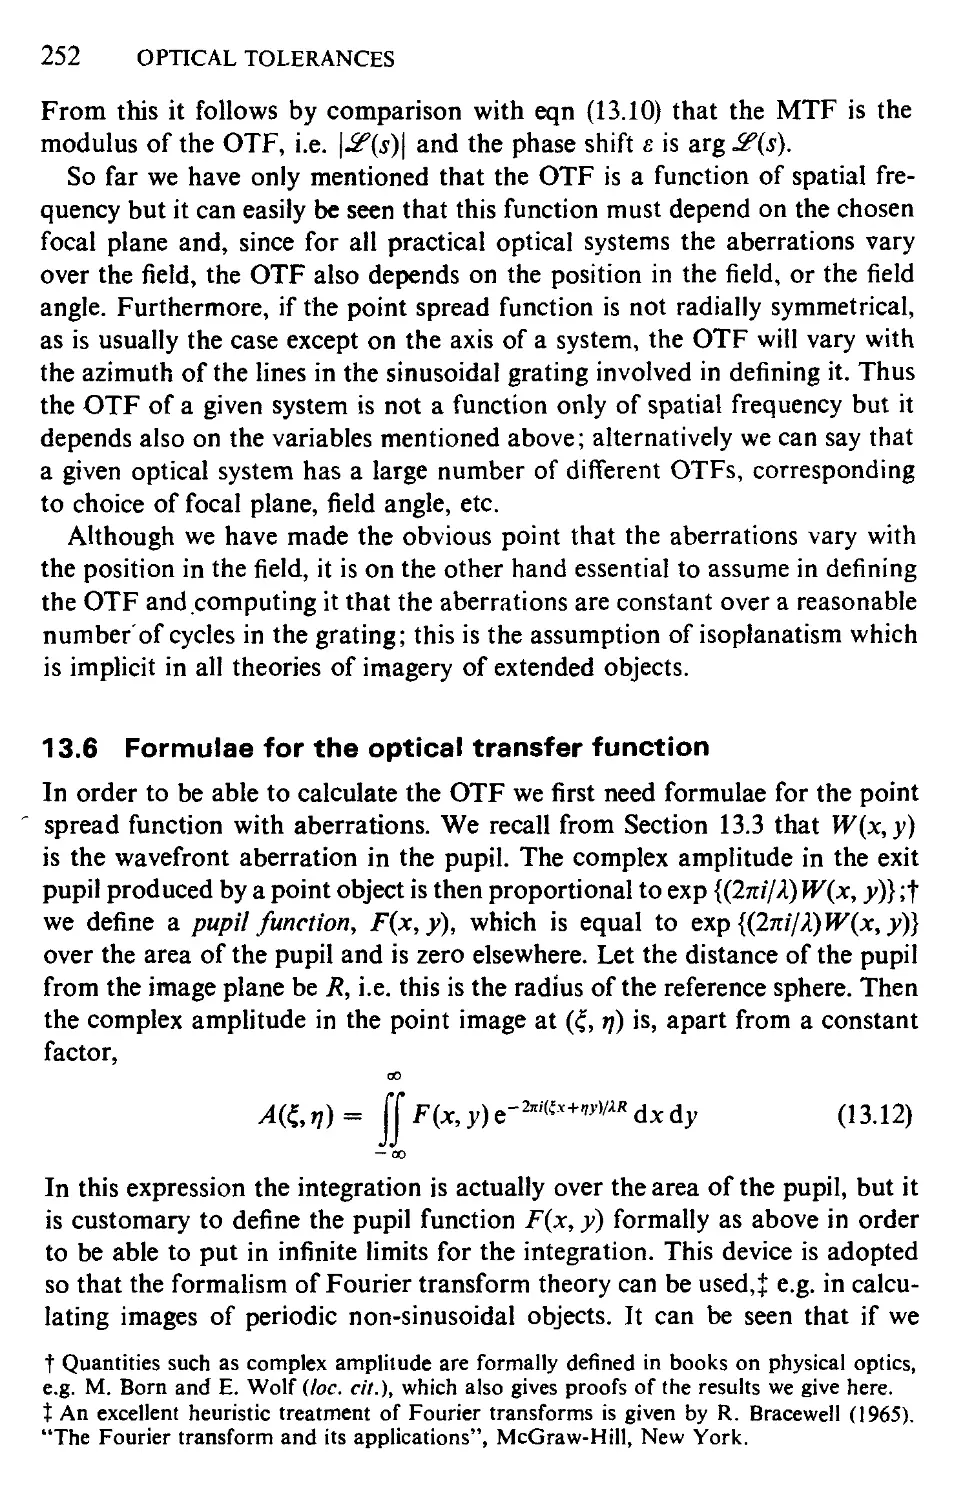 13.6 Formulae for the optical transfer function